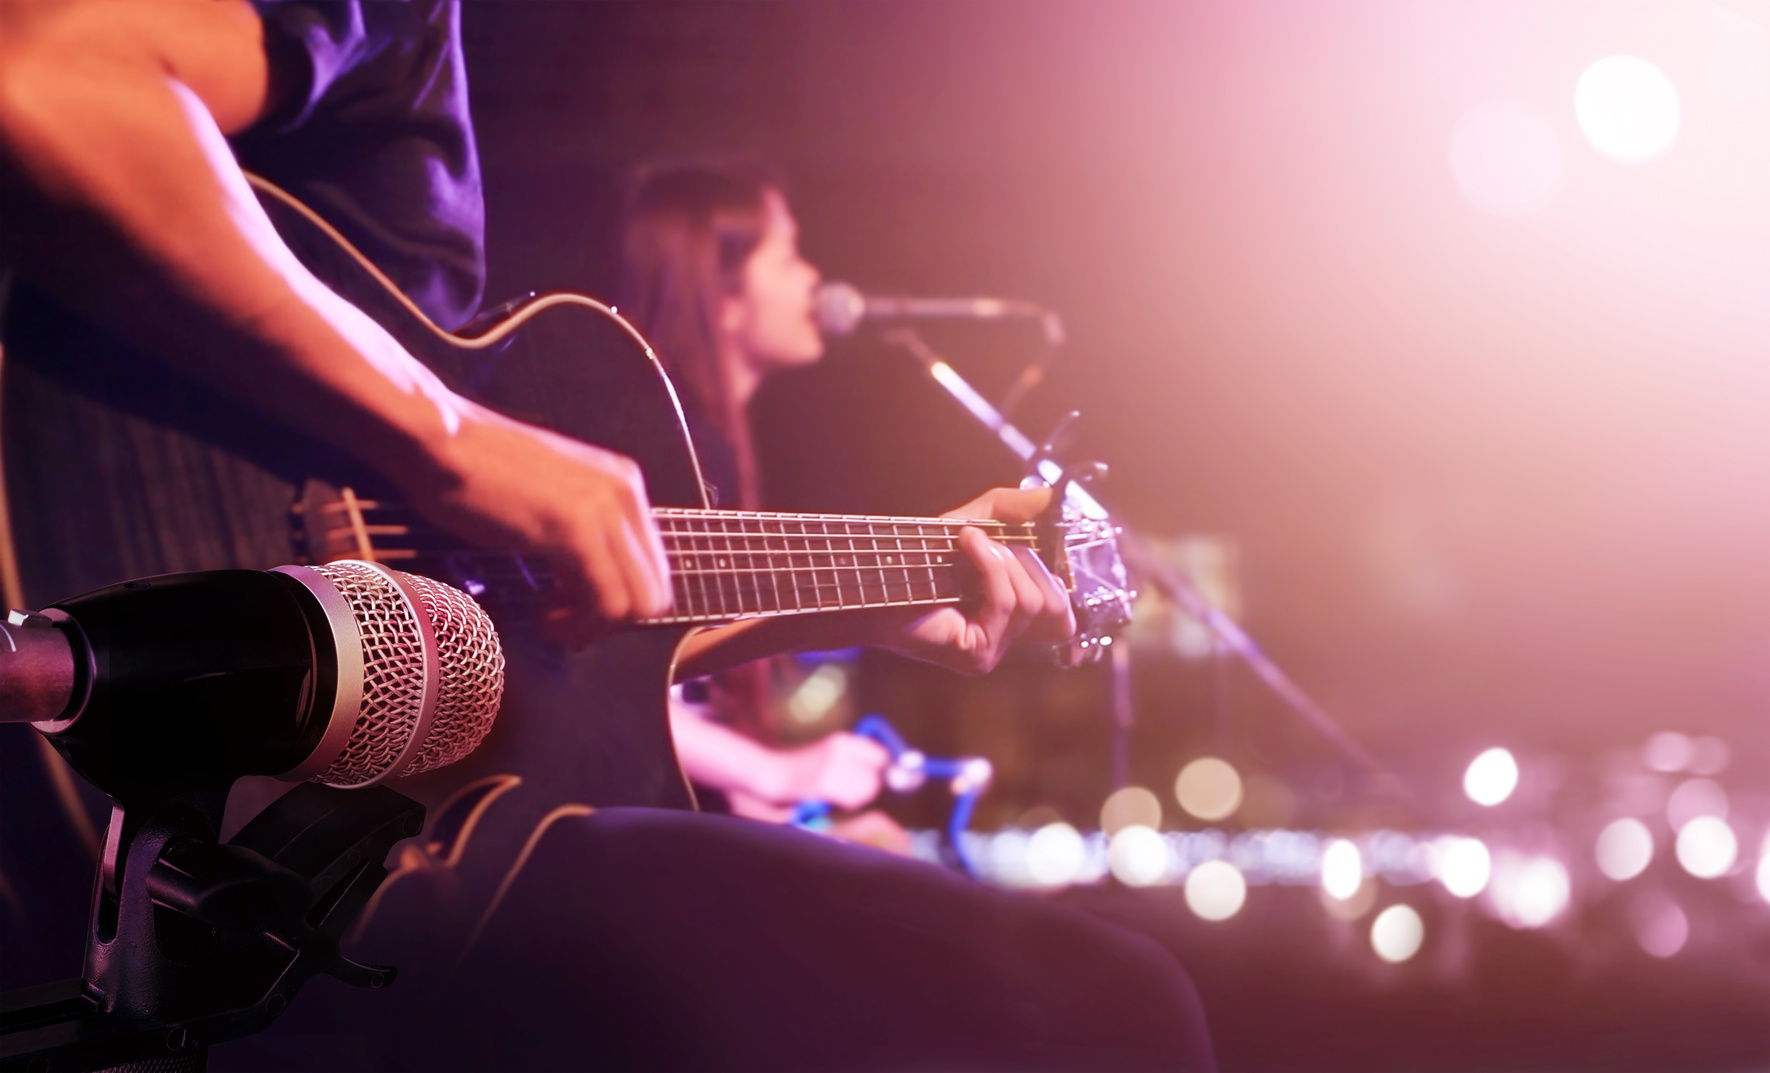 A Freelance Musician's Guide to Getting Paid